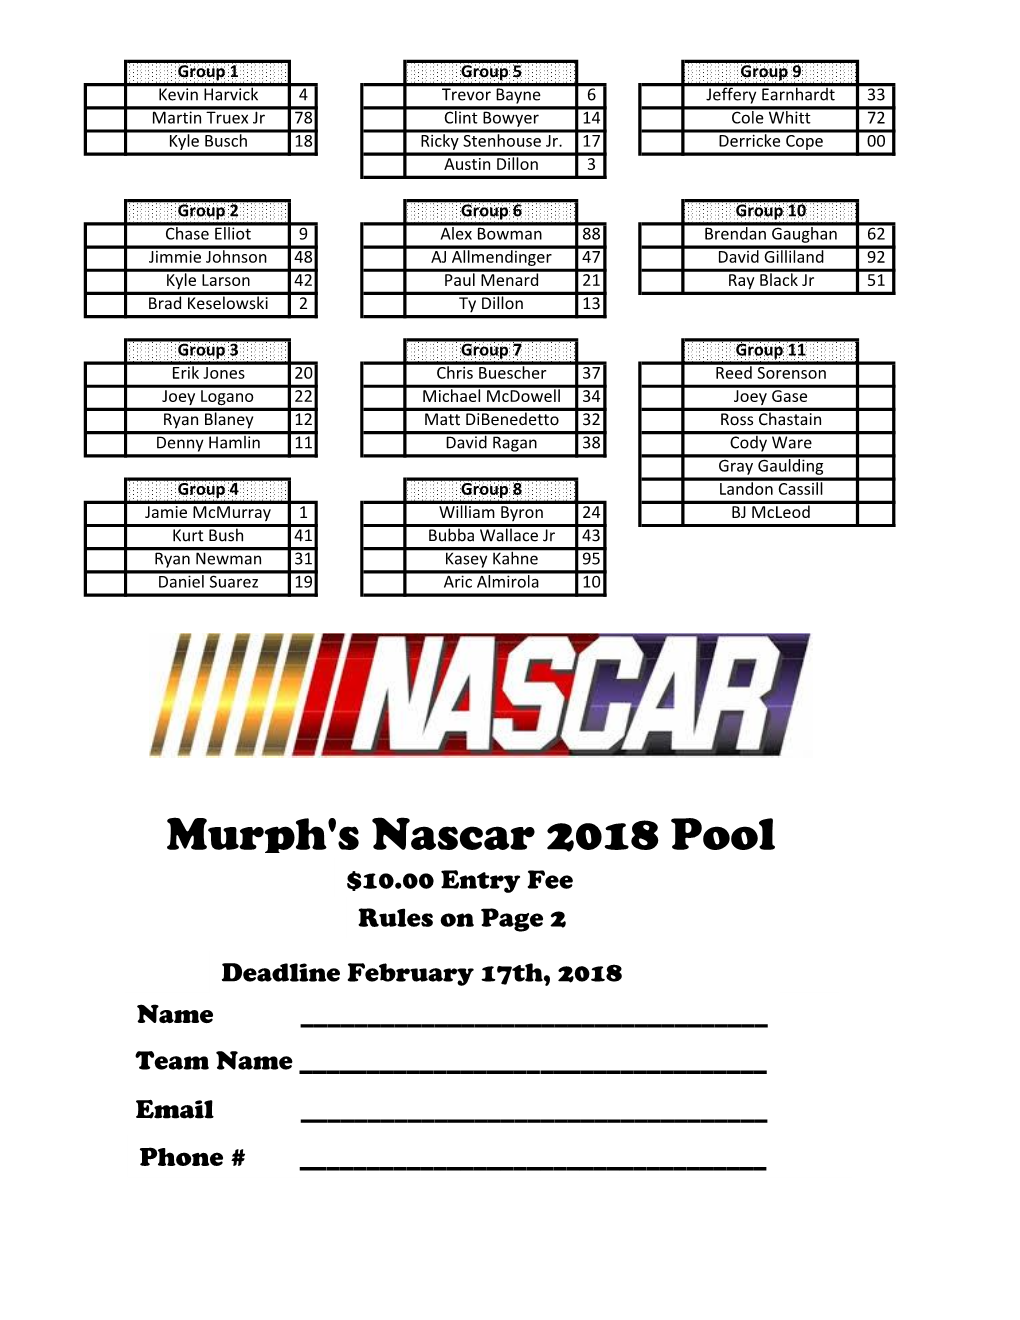 Murph's Nascar 2018 Pool $10.00 Entry Fee Rules on Page 2